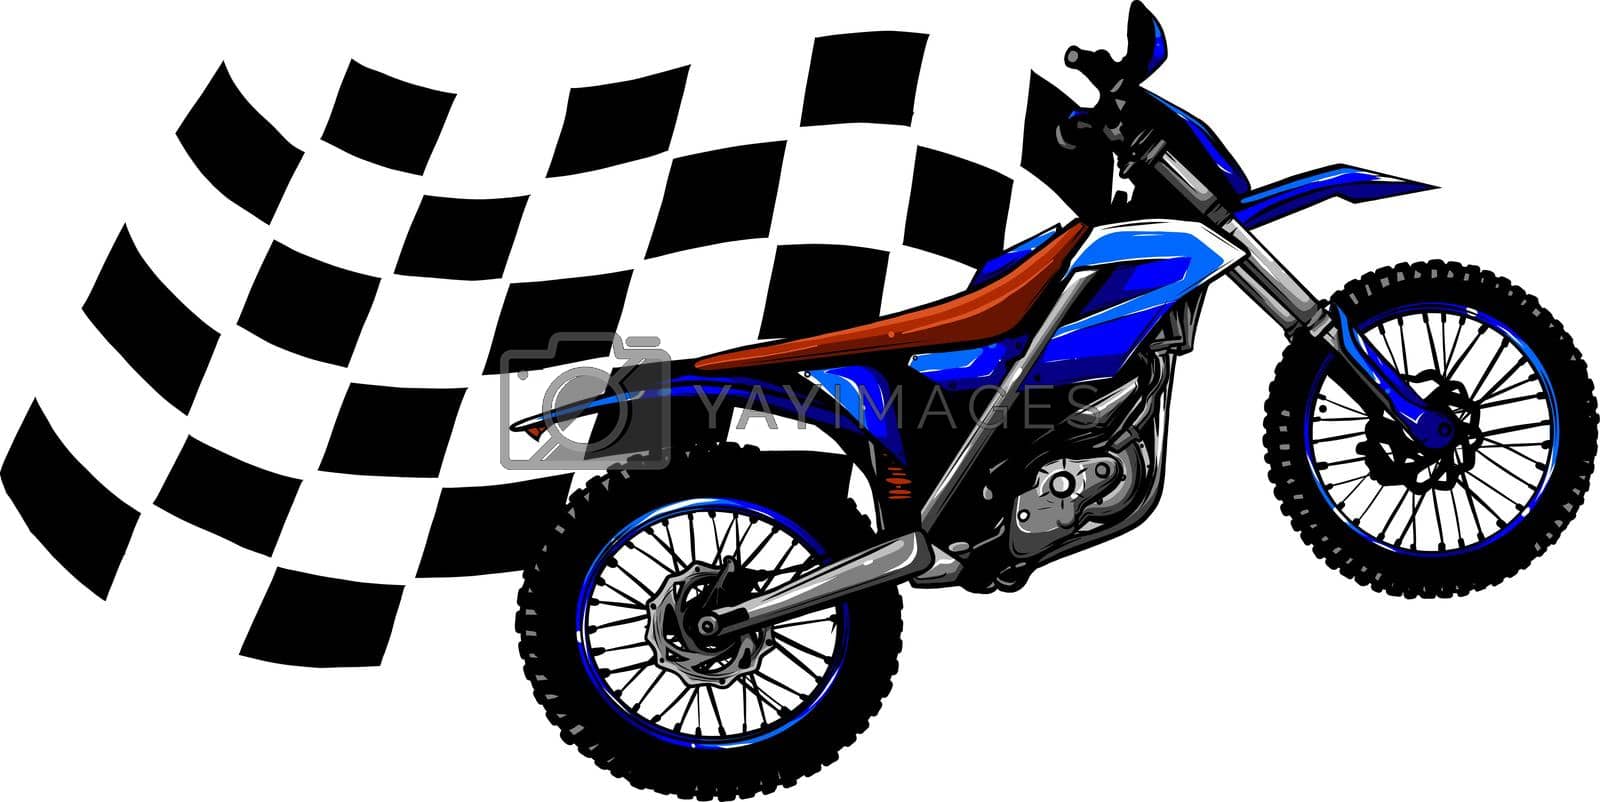 Royalty free image of motocross rider jumping riding the motocross bike vector by dean